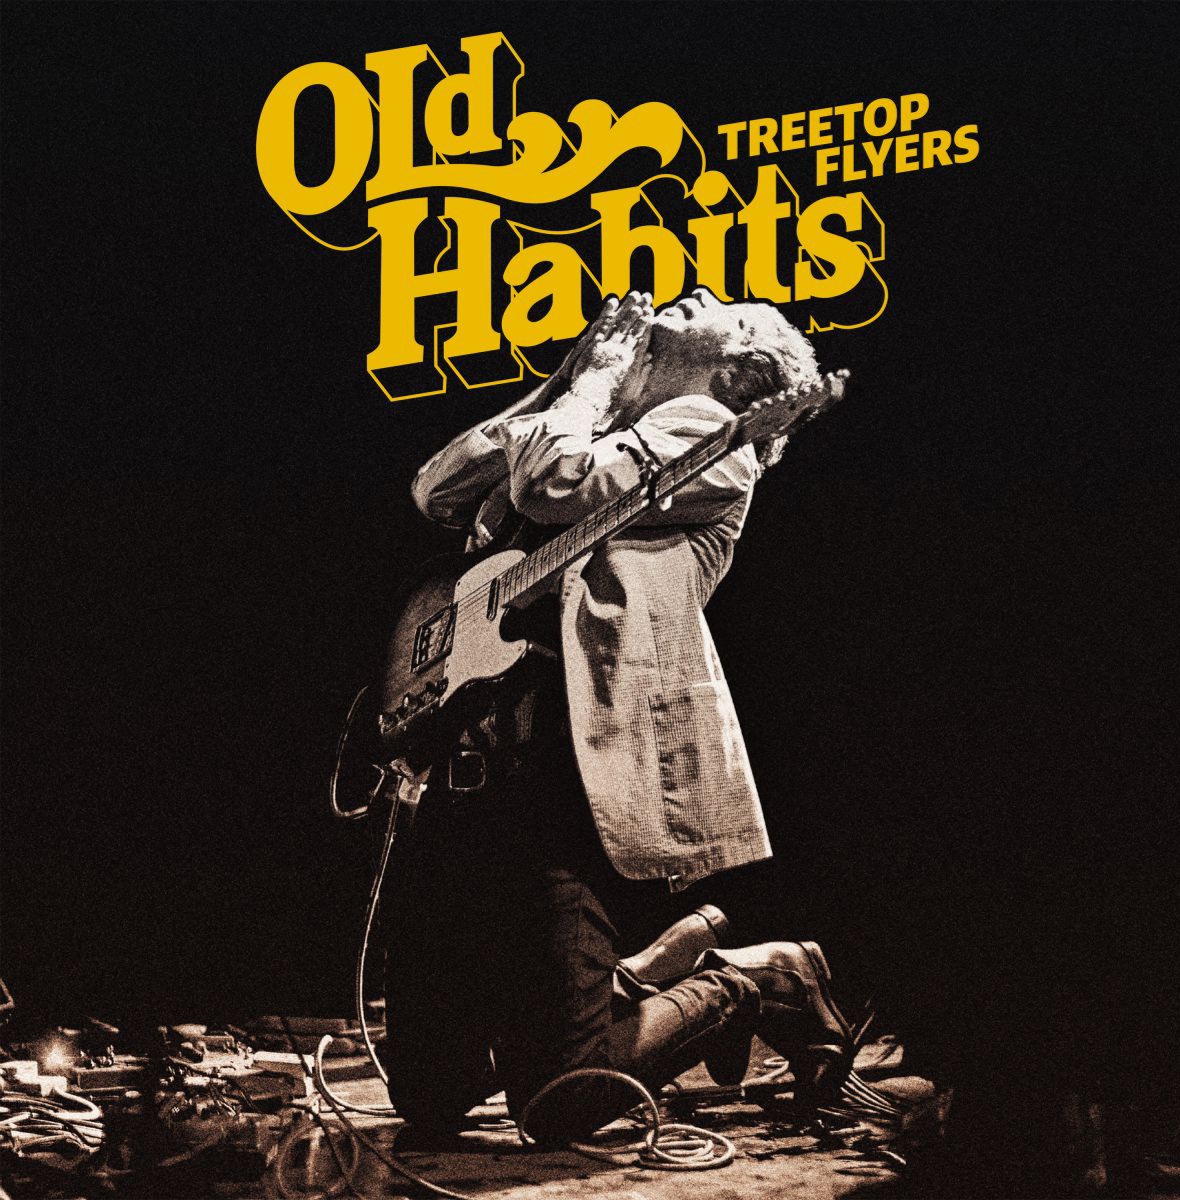 Treetop Flyers - Old Habits (Loose Music)